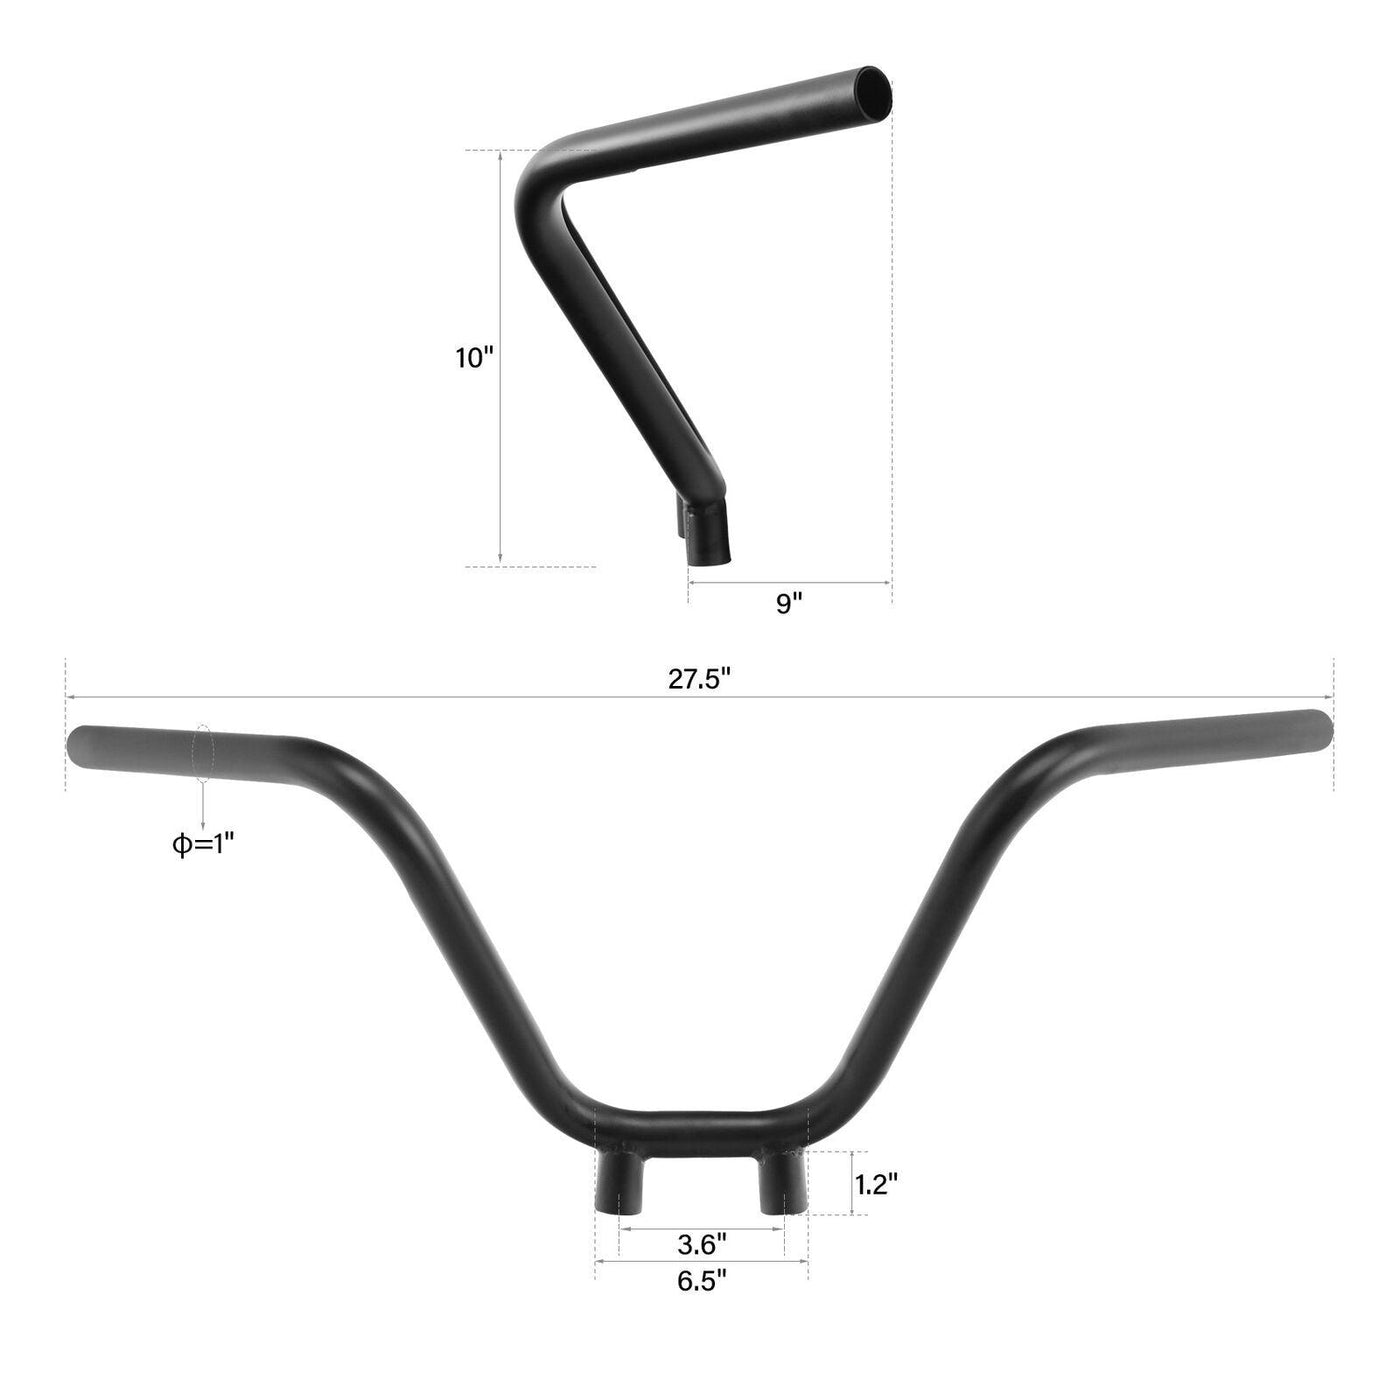 10" Rise Ape Hanger Bar Handlebar Fit For Harley Softail Sportster XL Dyna - Moto Life Products